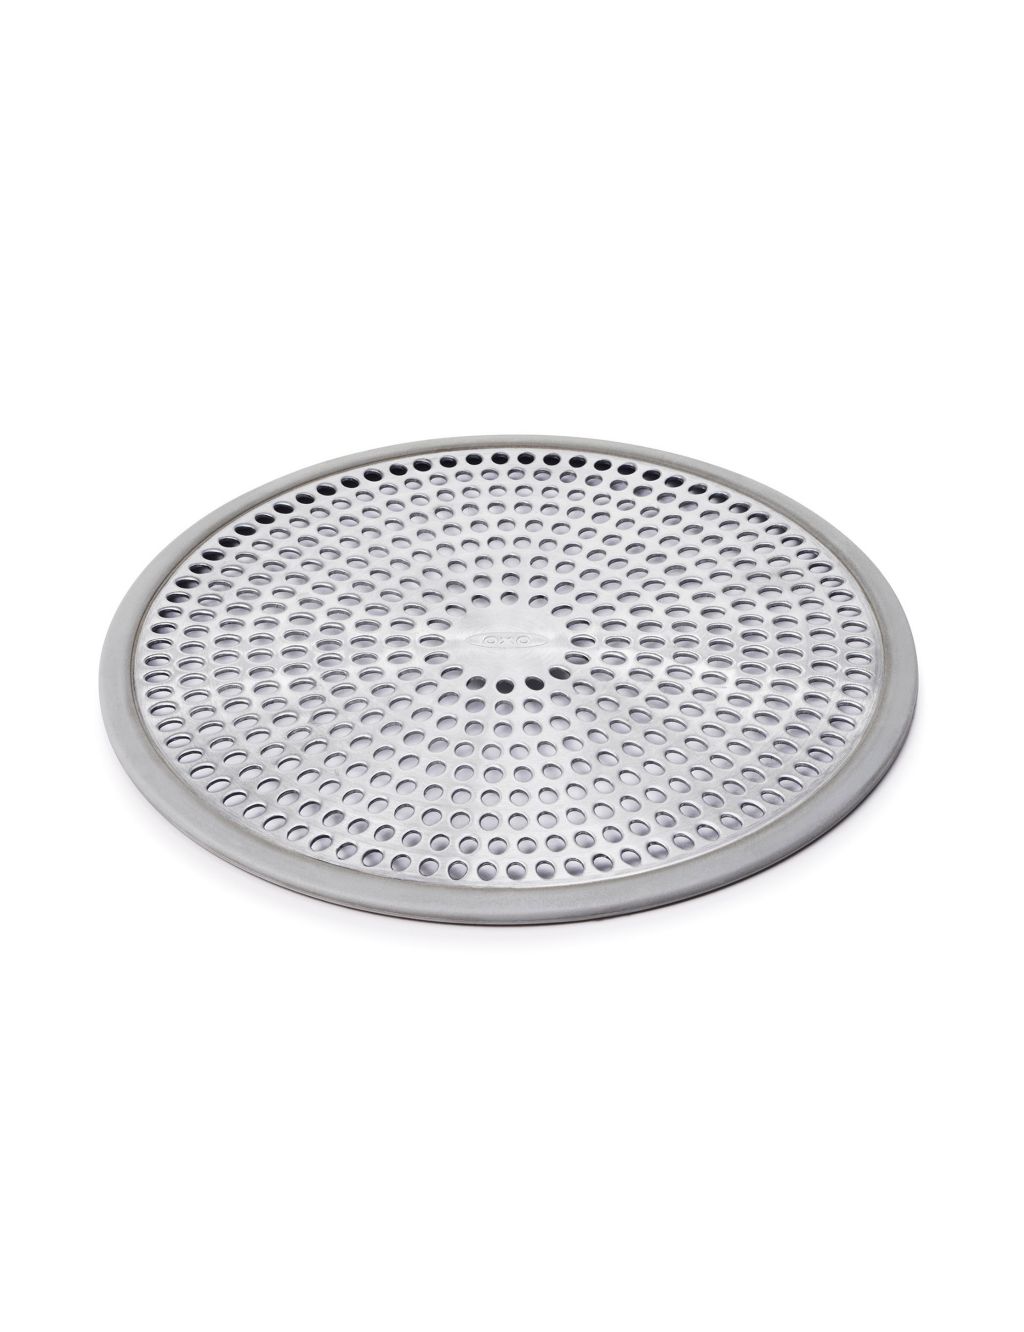 Good Grips Shower Drain Protector image 2